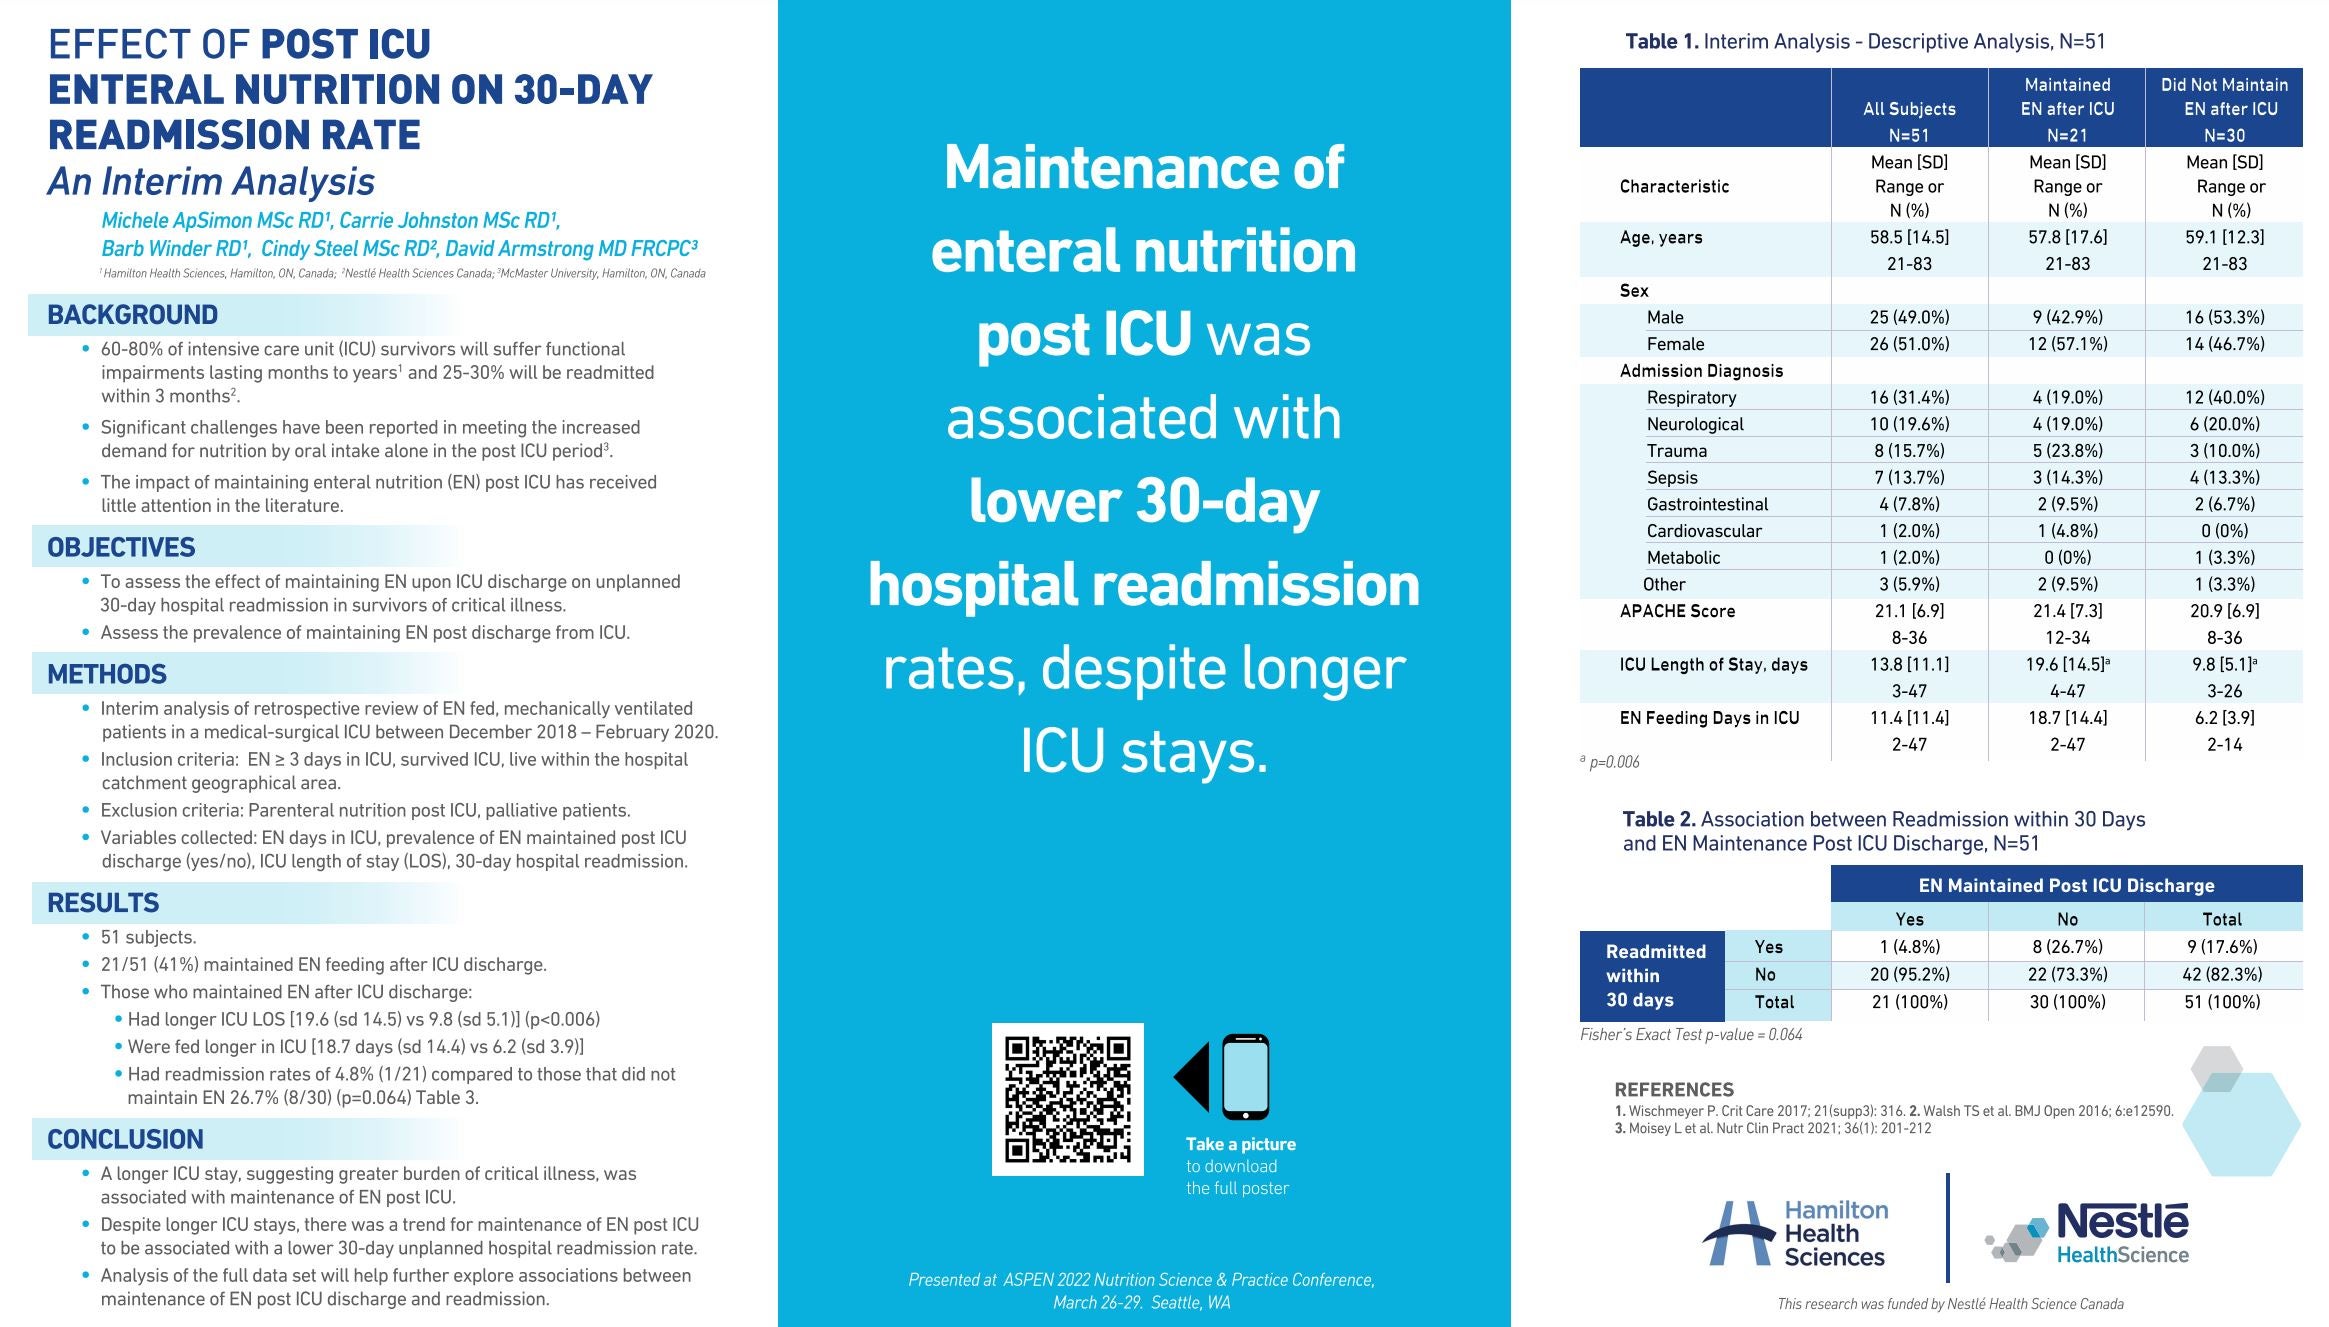 Effect of Post-ICU Enteral Nutrition on 30-Day Readmission Rate